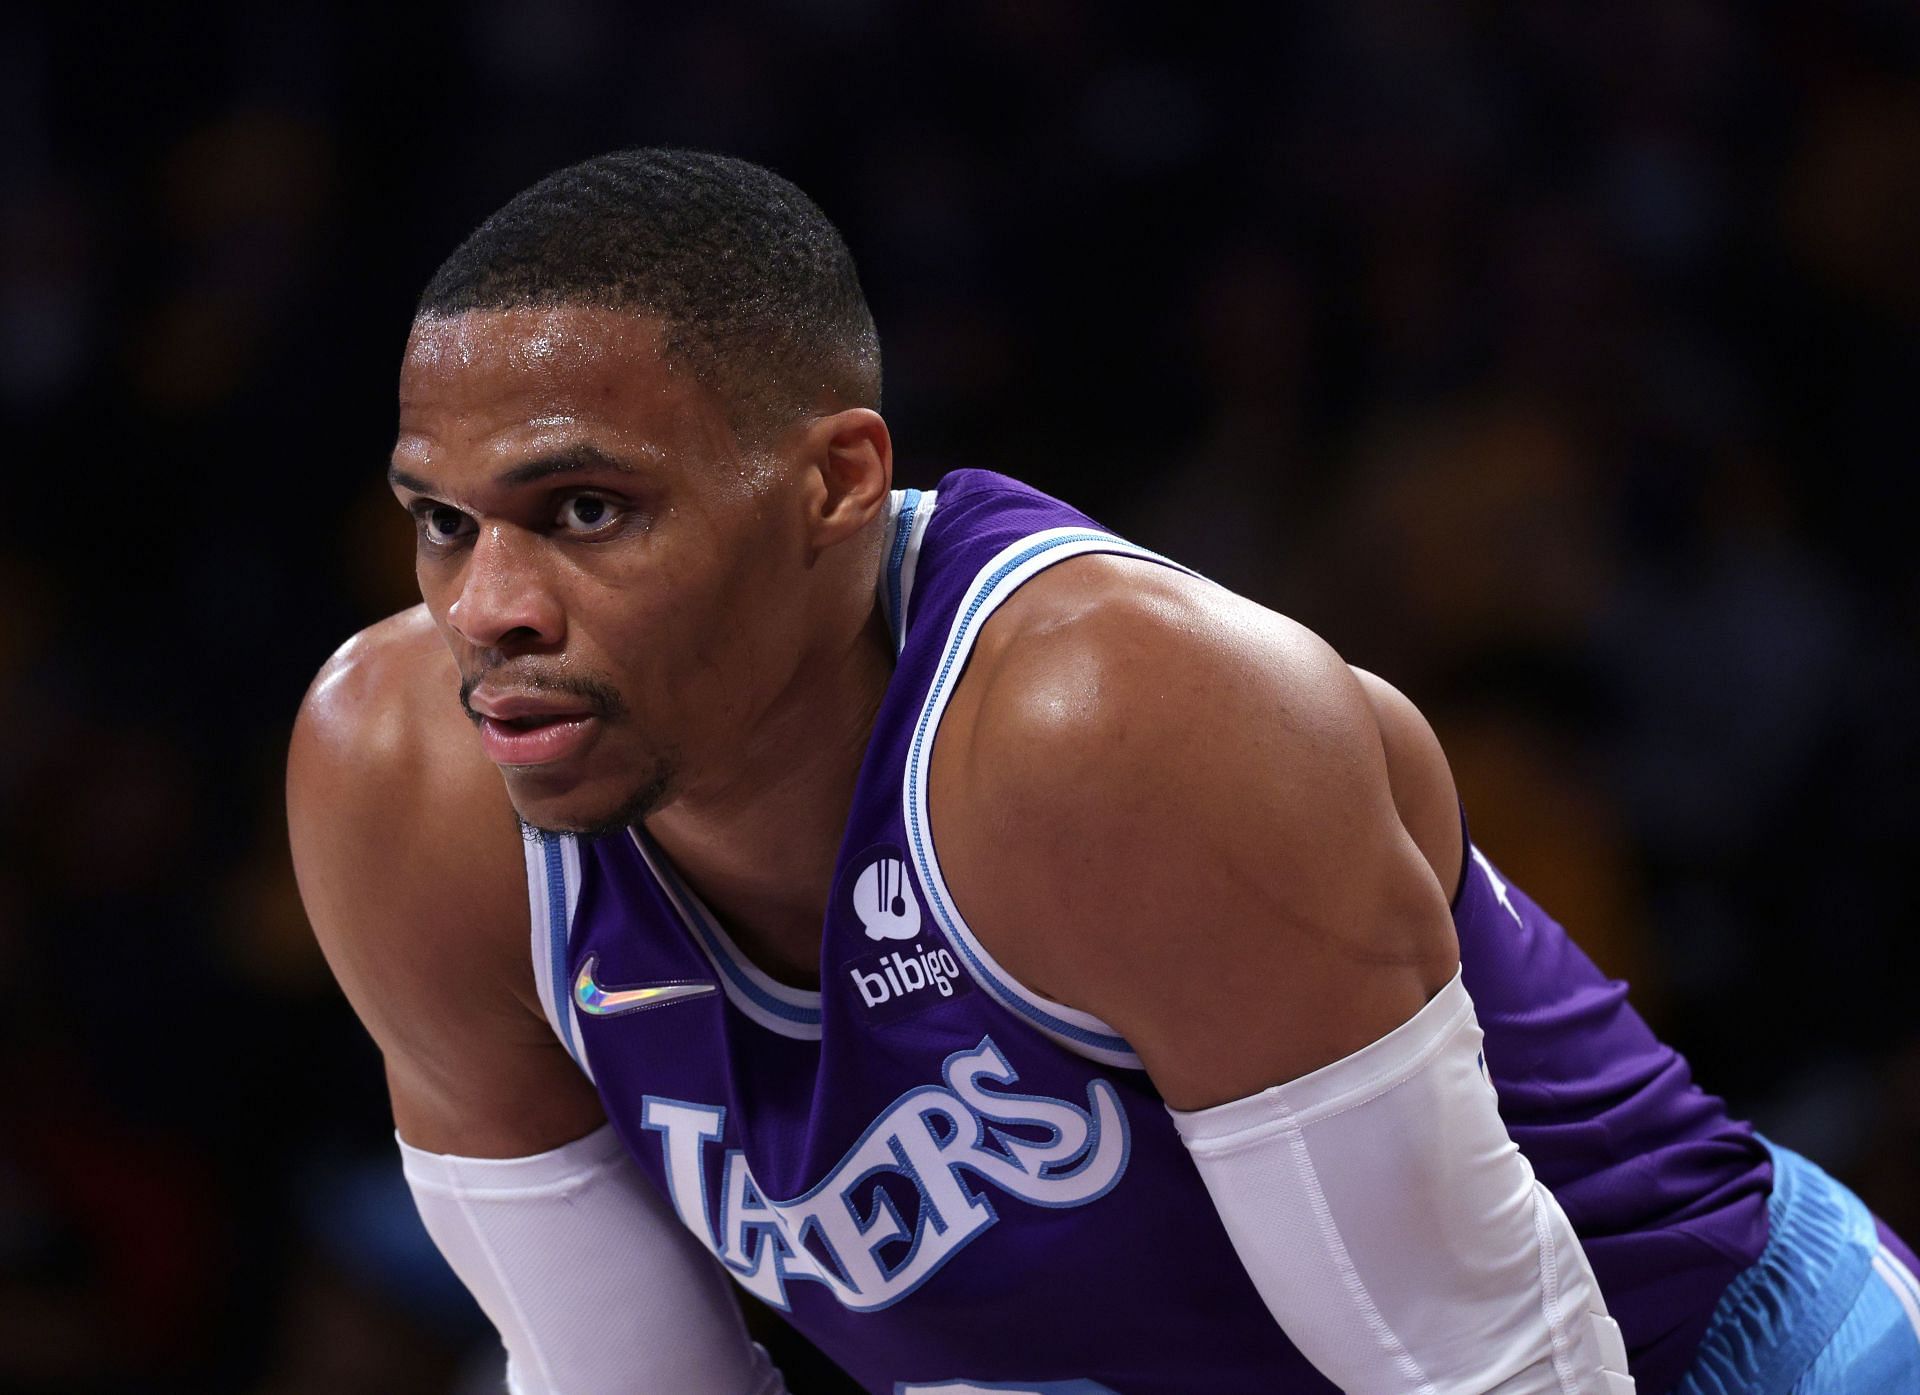 Russell Westbrook #0 of the Los Angeles Lakers waits for a free throw during the game against the San Antonio Spurs at Staples Center on December 23, 2021 in Los Angeles, California.